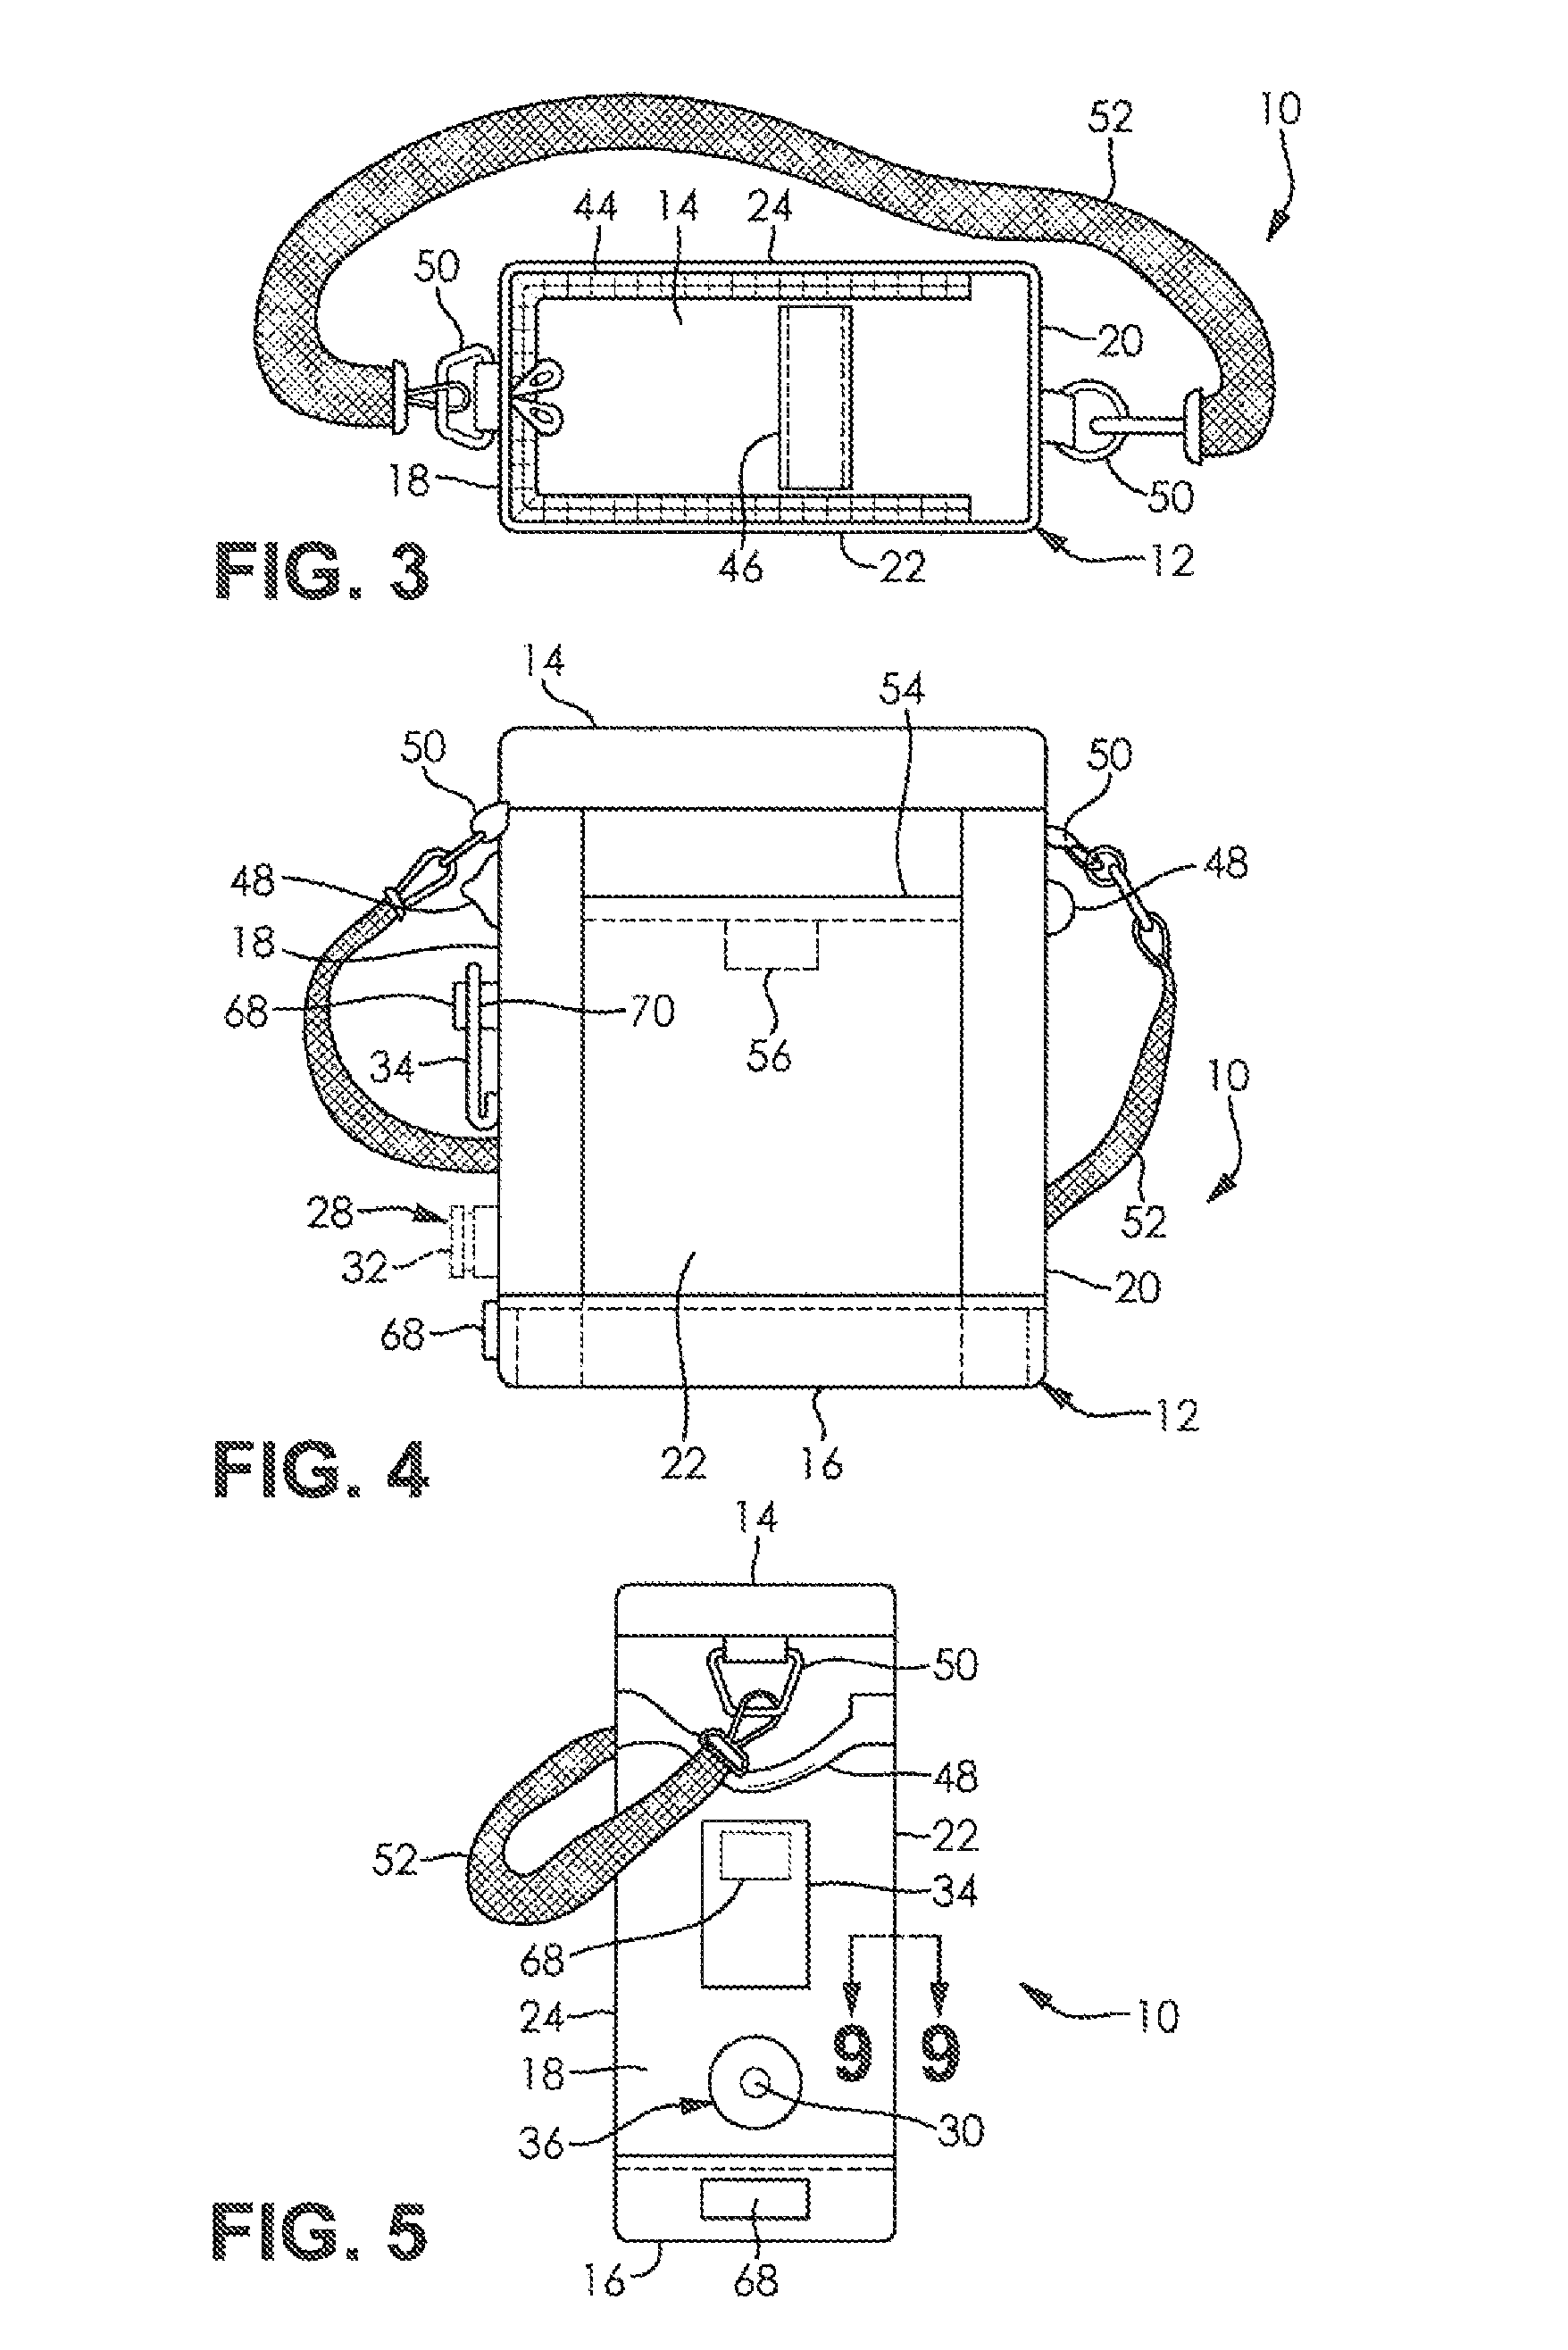 Insulated carriers for bulk beverage containers having spigots, spouts or the like